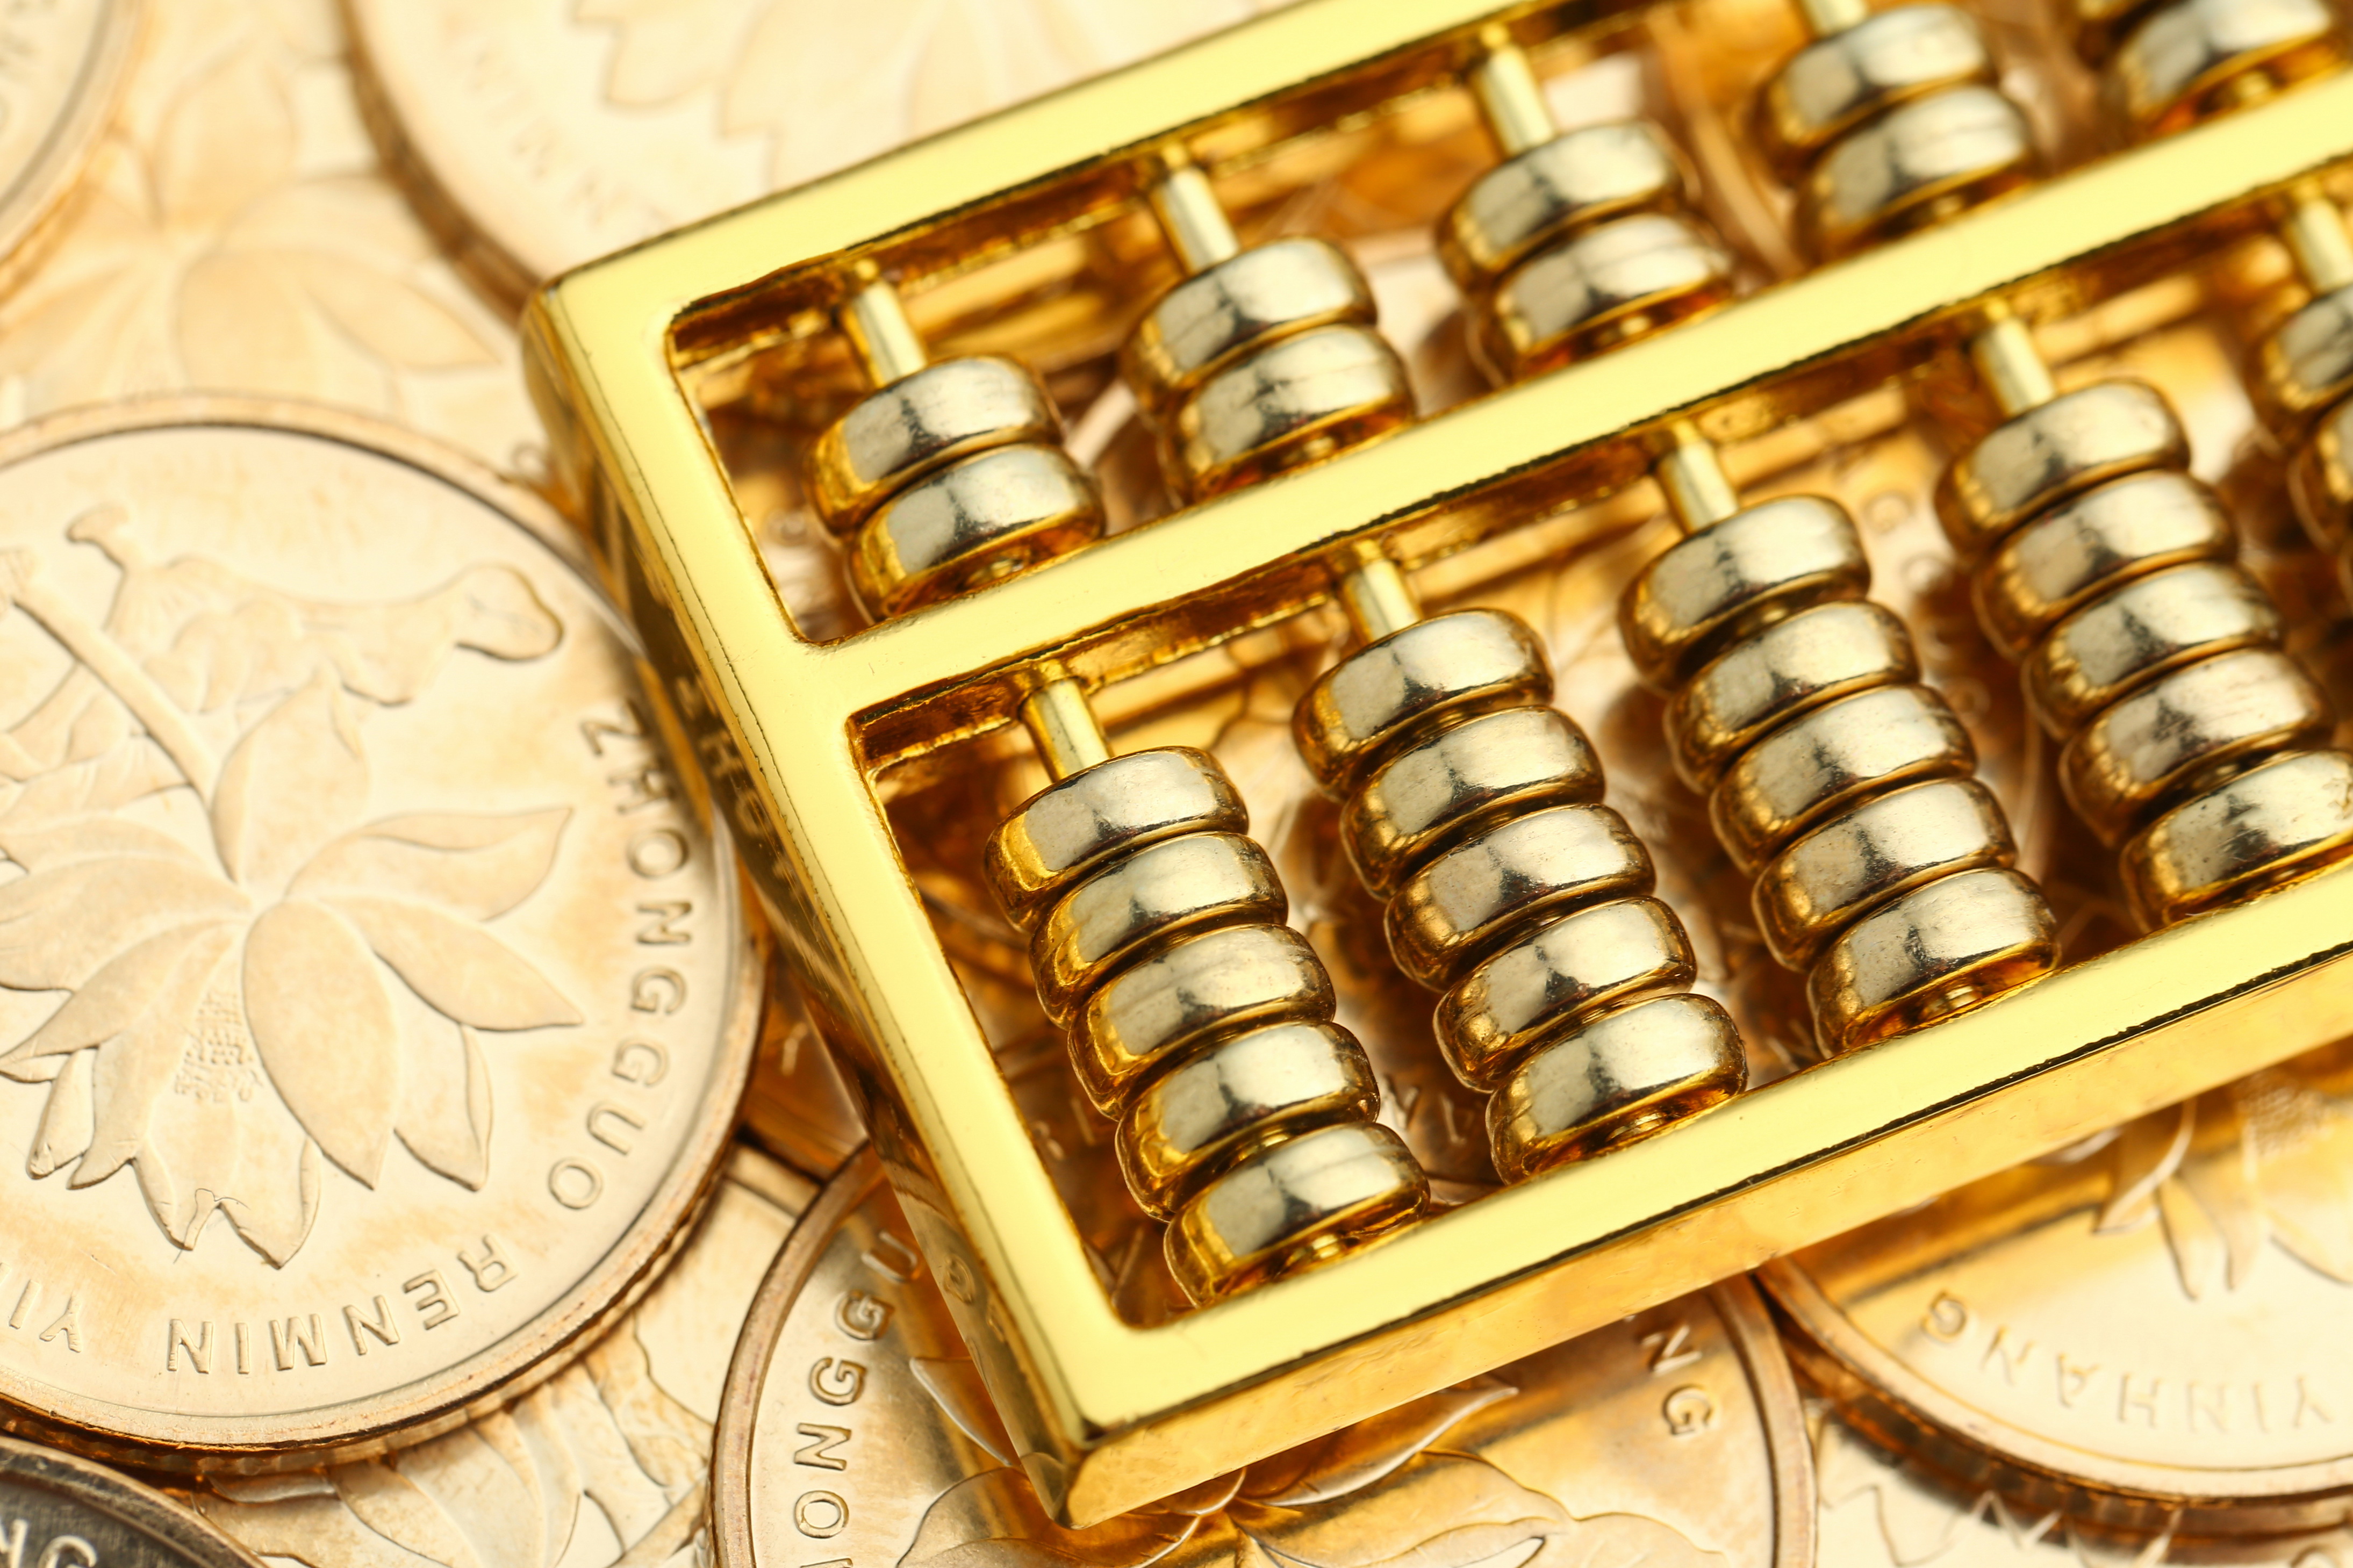 7 Questions to Ask Your Bullion Dealer